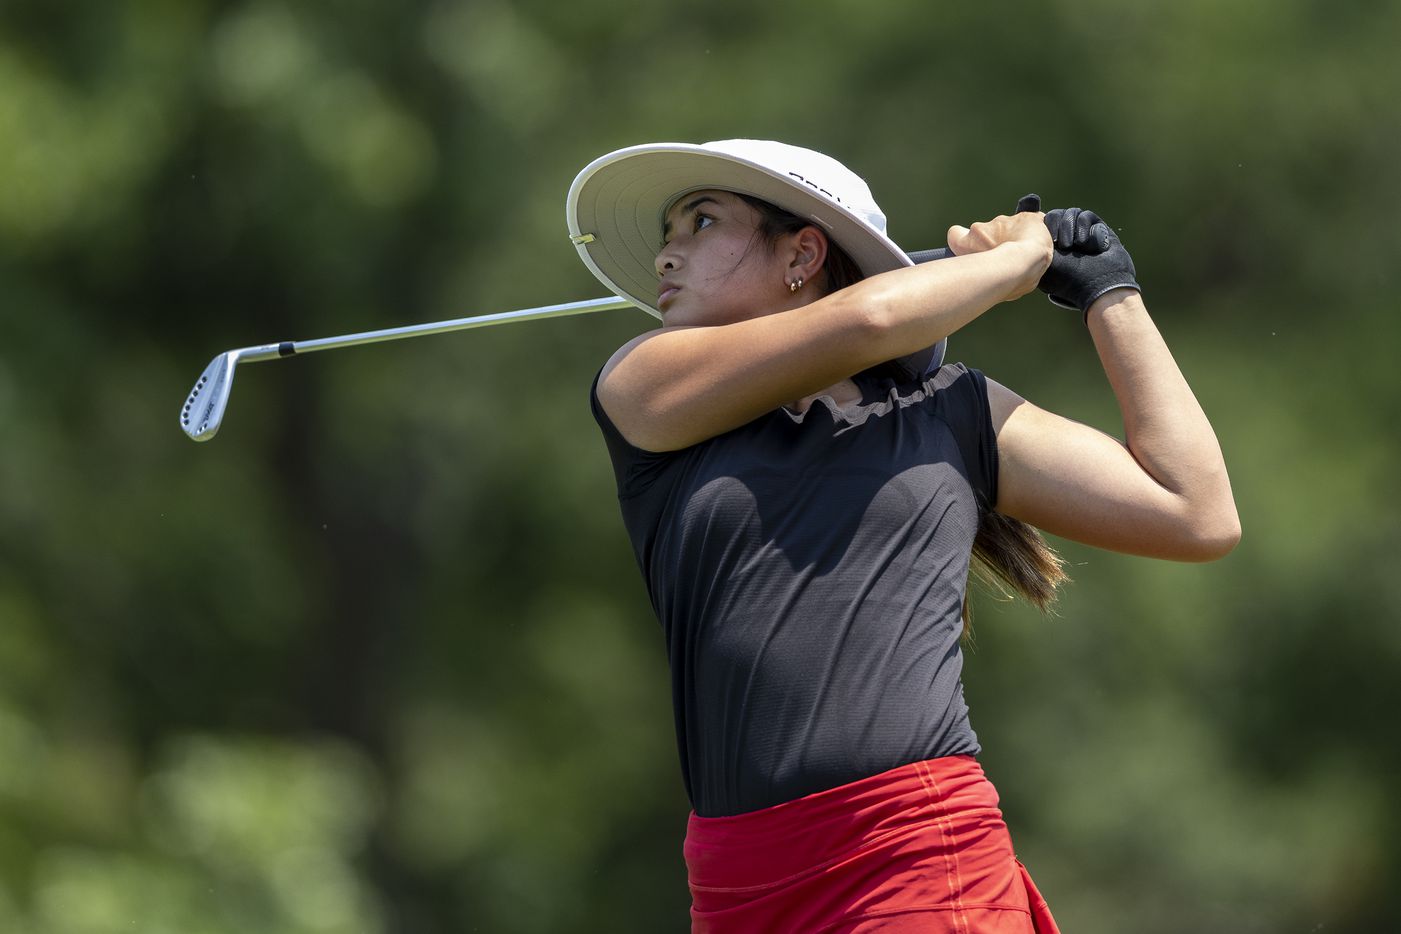 Coppell’s Kristin Angosta hits from the 8th tee box during the 6A girls state golf...